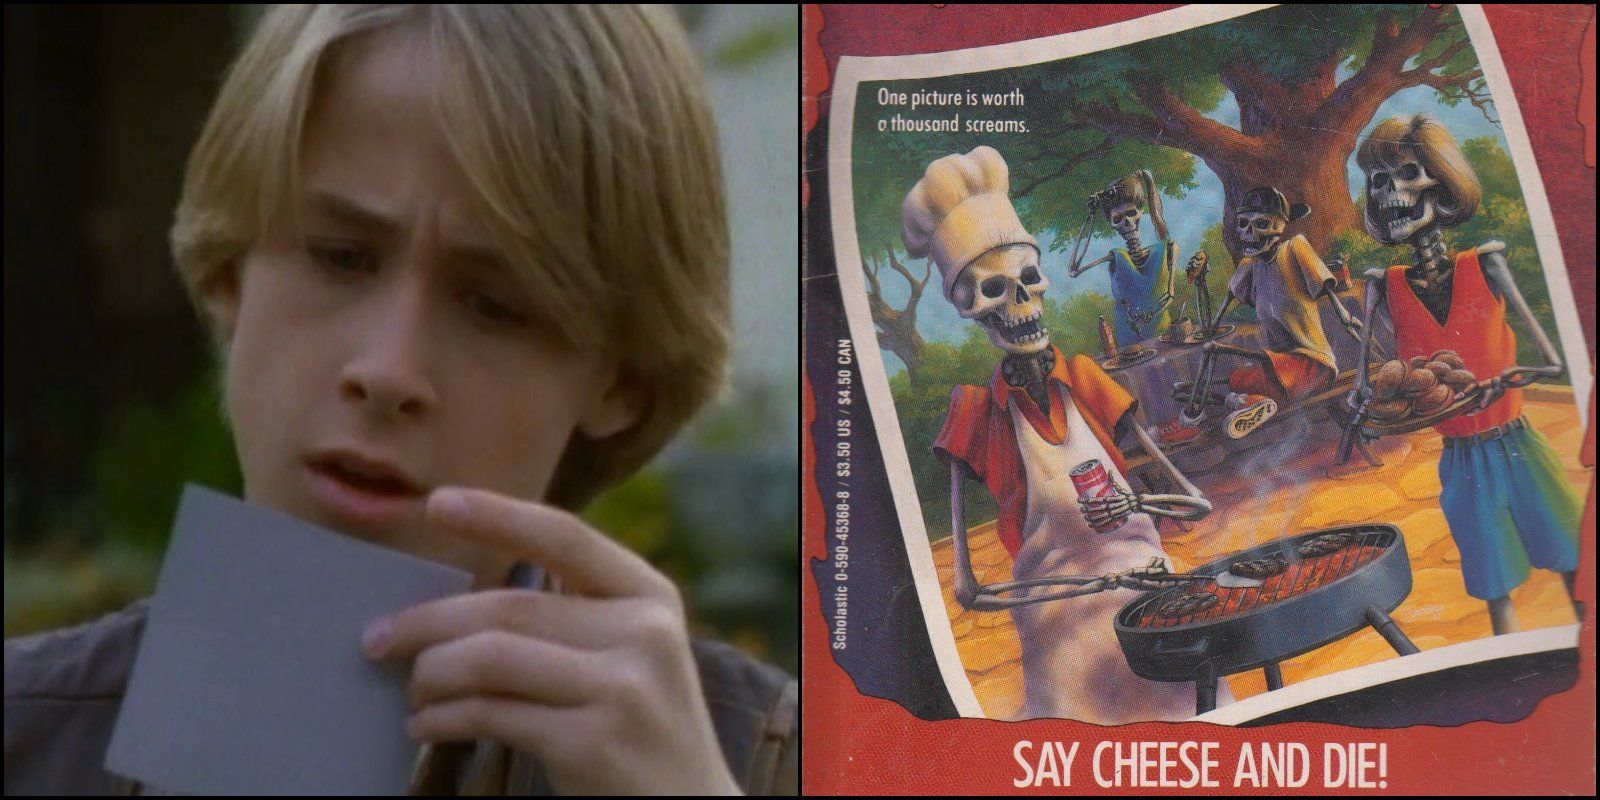 Ryan Gosling in the &quot;Say Cheese and Die&quot; episode of Goosebumps.